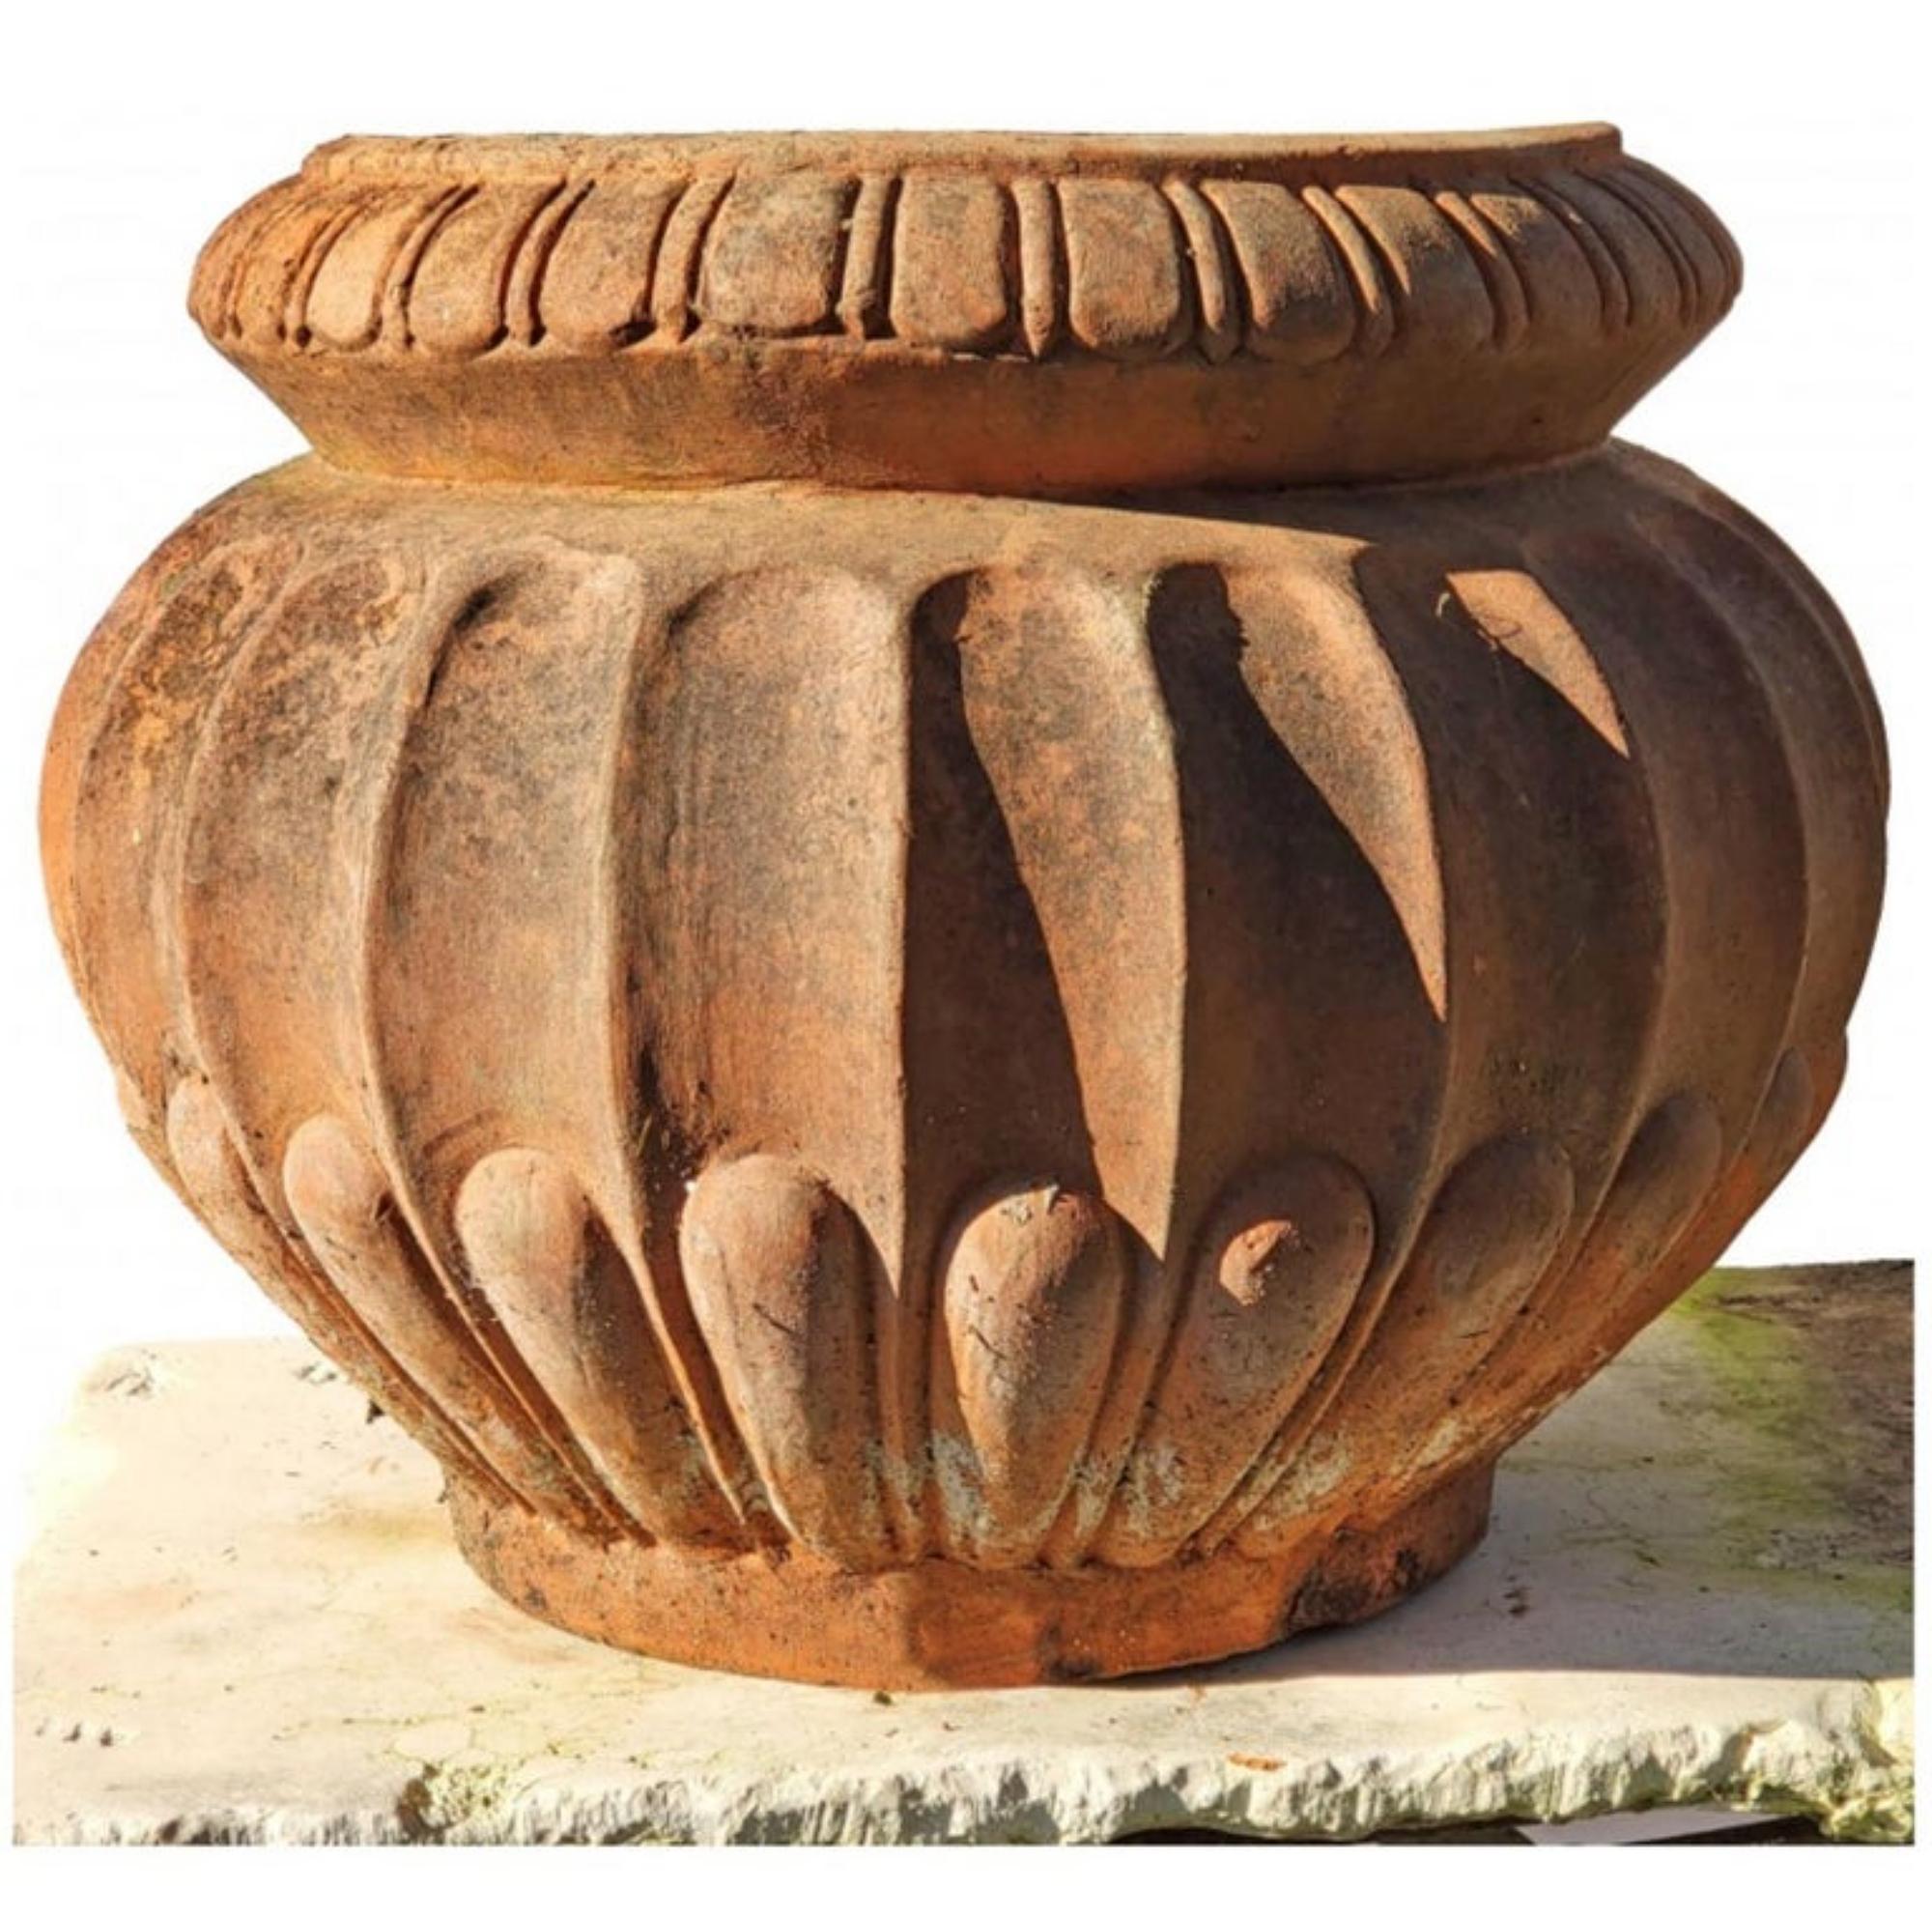 Ancient original cachepot in terracotta lucchese - Tuscany 19th century

Original antique terracotta Cachepot from Lucca - Tuscany
Vase with handles.

Measures: height 30 cm
Weight 15 kg
Base diameter 18 cm
Internal dimensions of the mouth